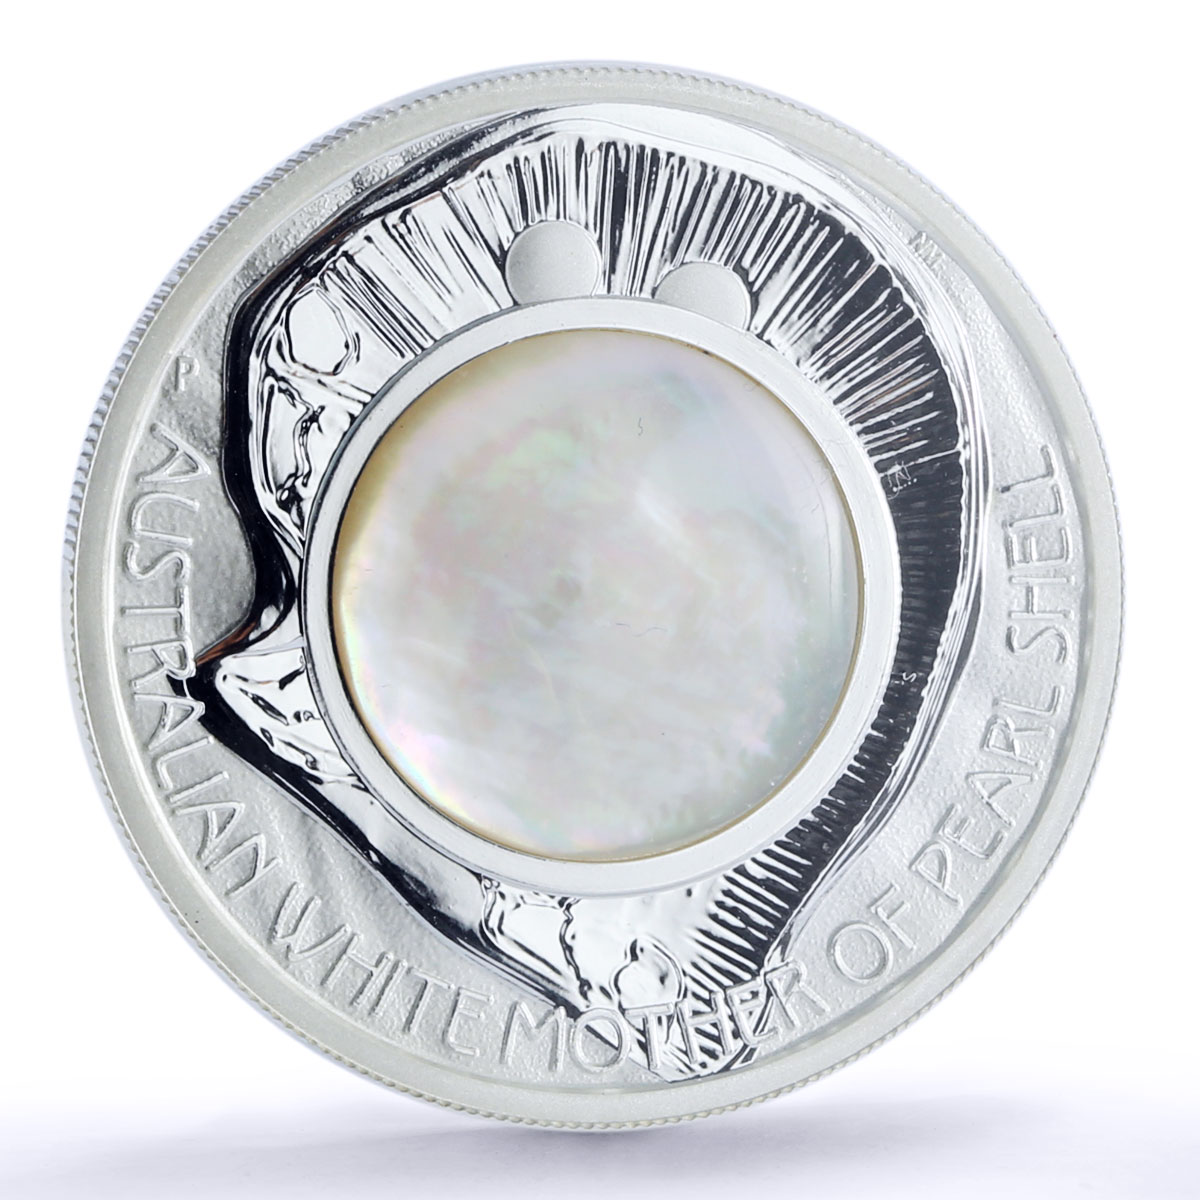 Australia 1 dollar White Mother of Pearl Shell PR70 PCGS silver coin 2015